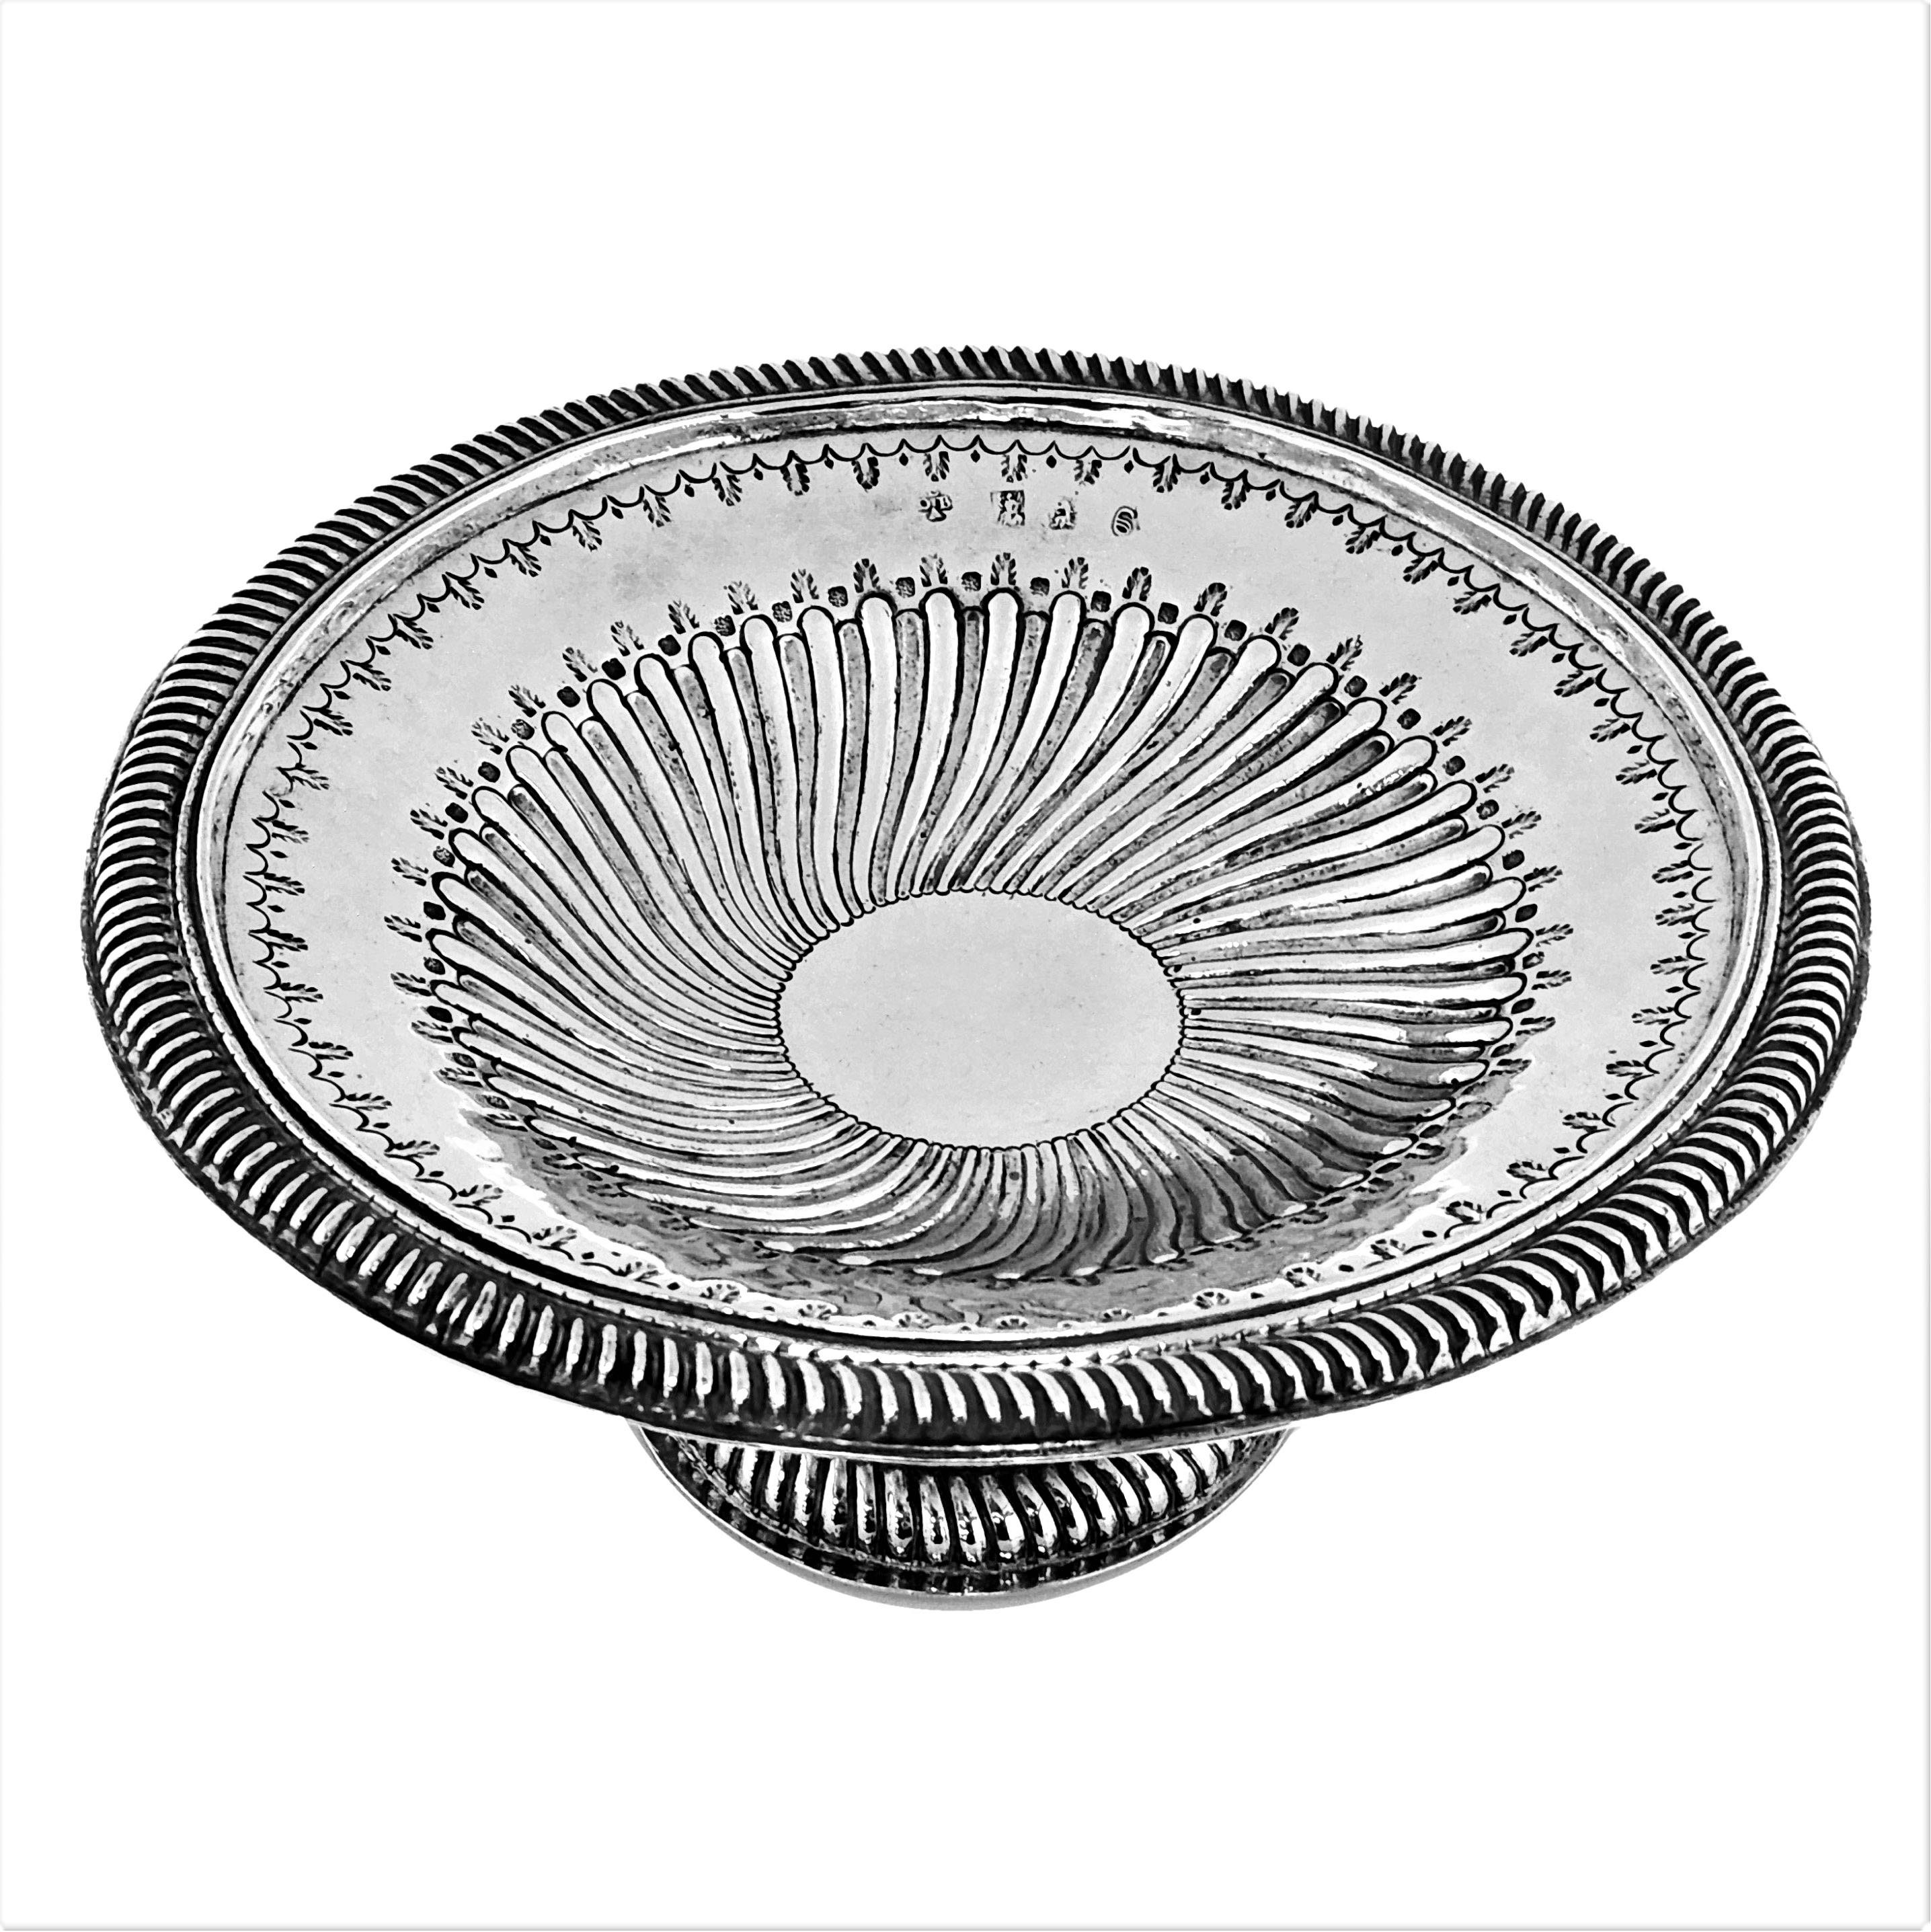 A rare and impressive Antique William III Britannia Silver Tazza. This 17th century Solid Silver Dish has an unusual writhen fluted pattern around the centre of the bowl and is embellished with a gadrooned border on the rim and spread pedestal foot.